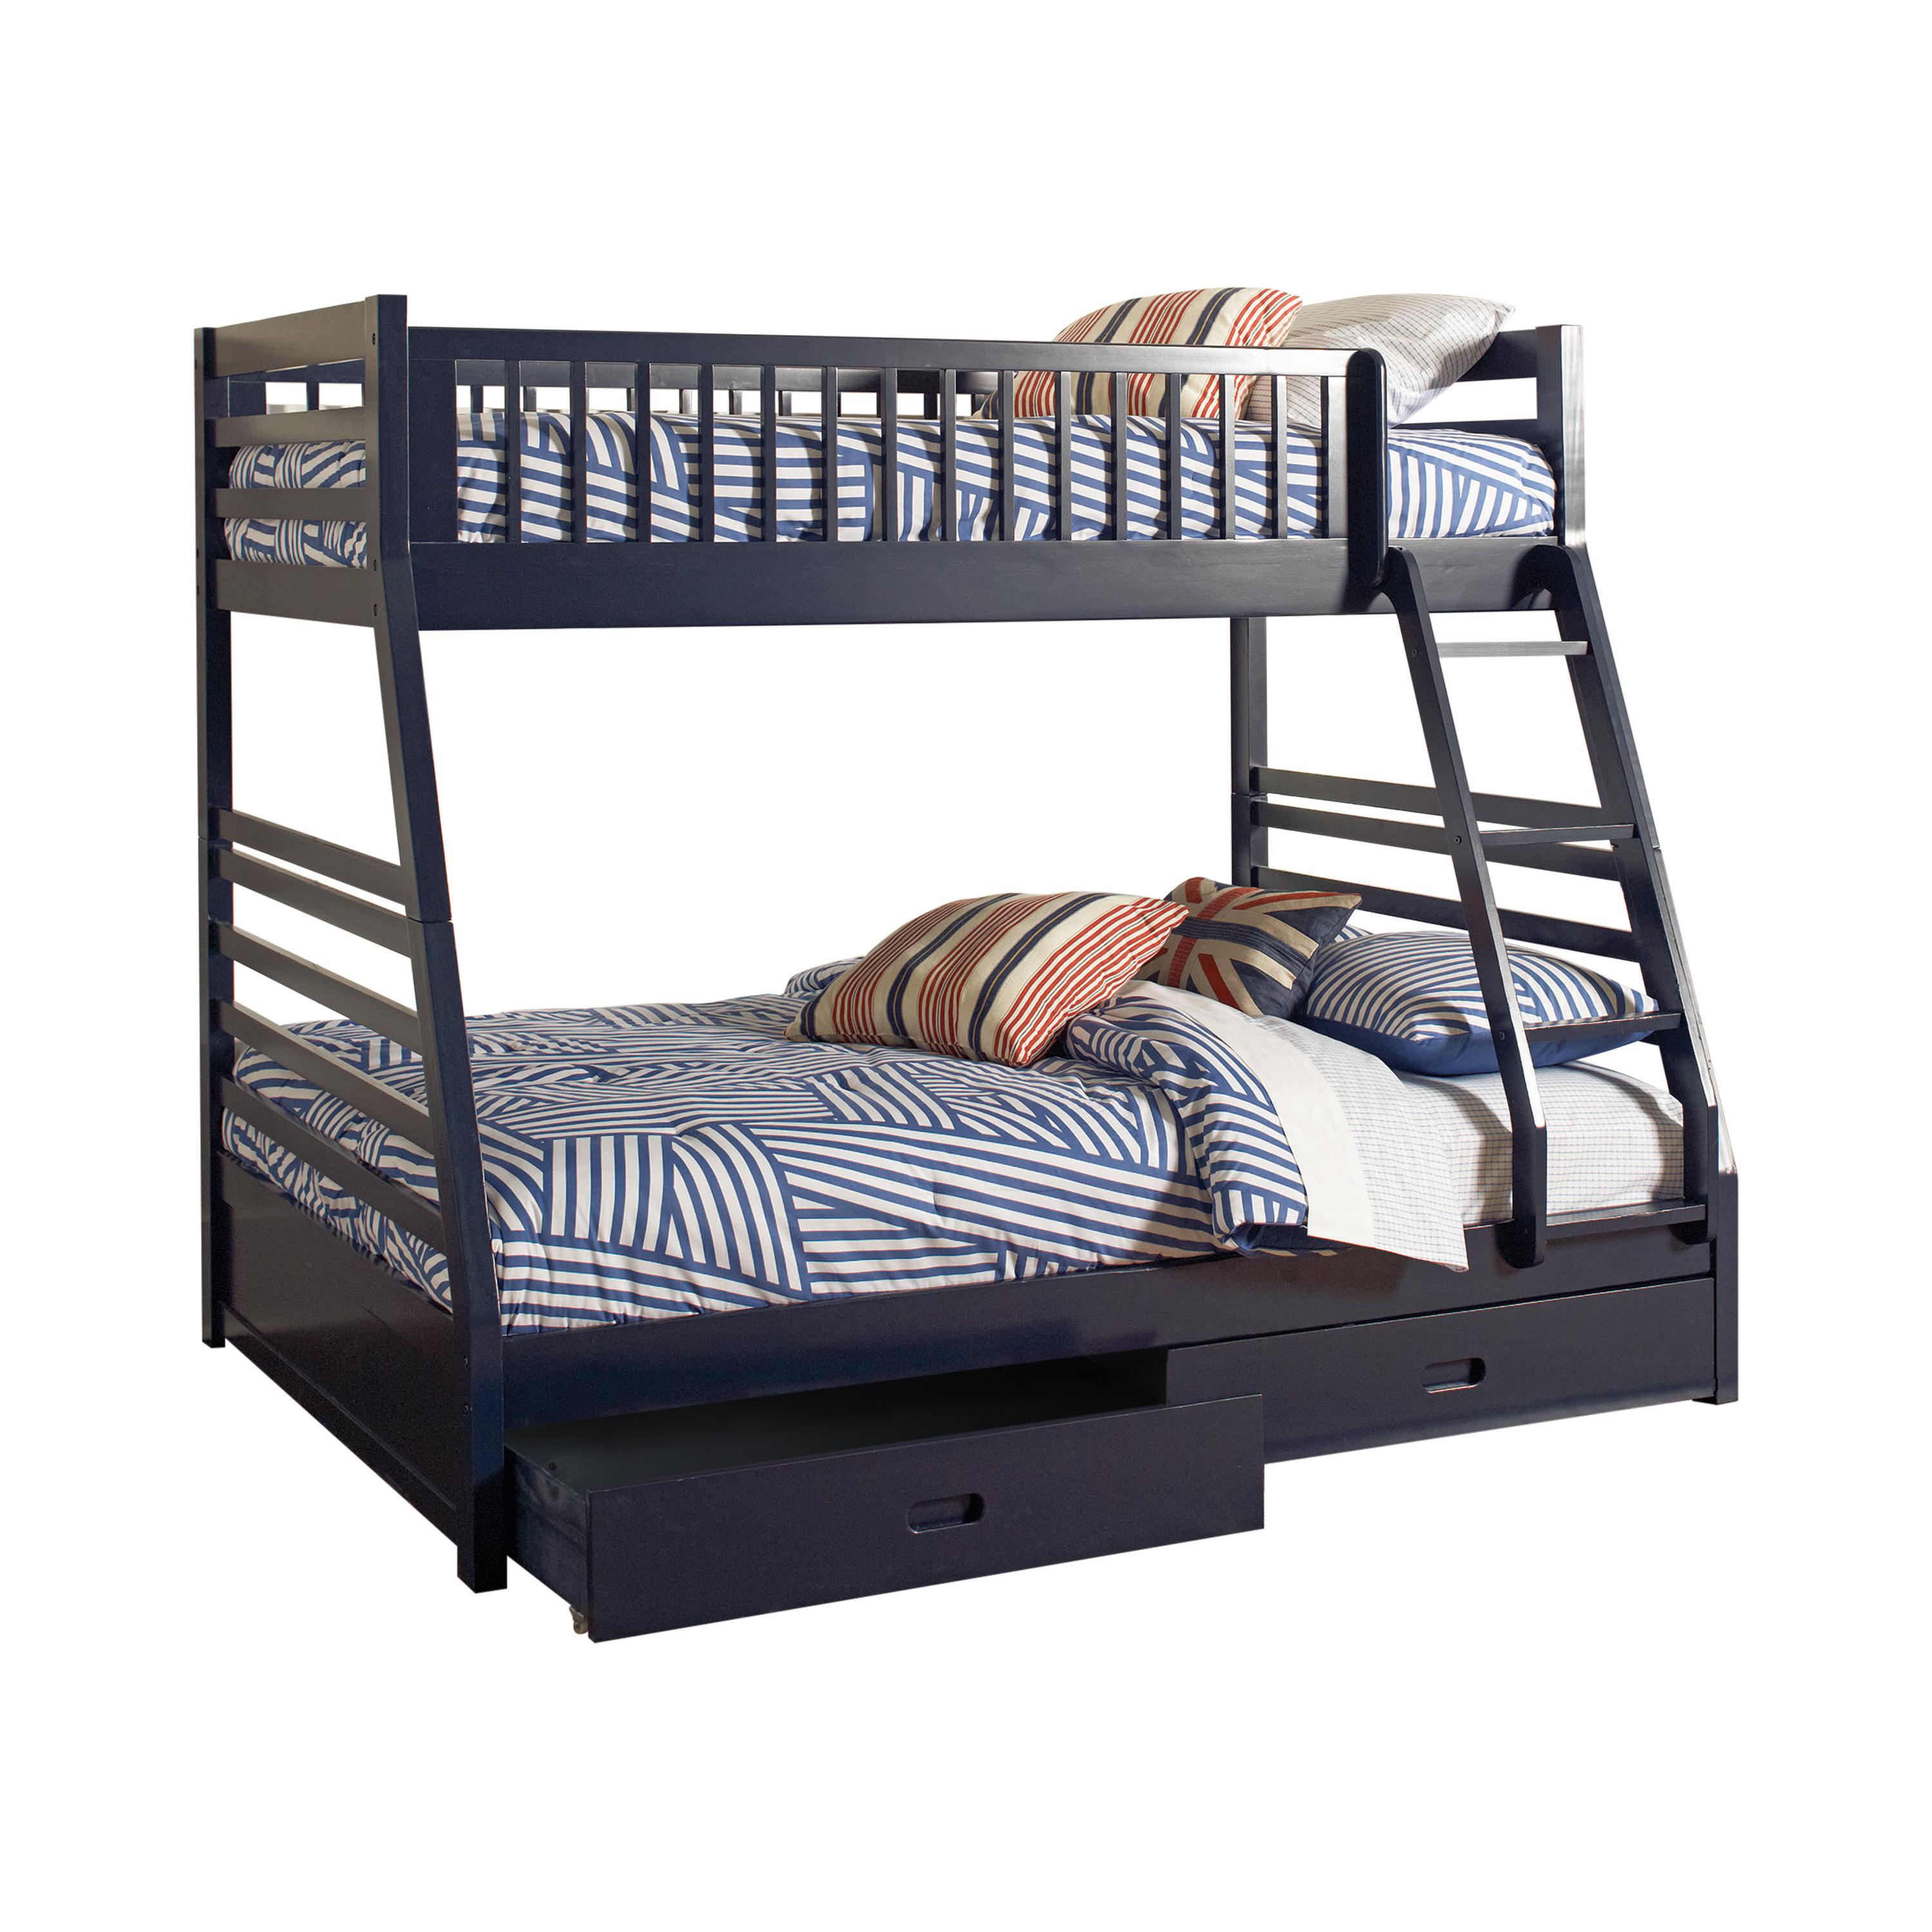 Transitional Bunk Bed 460181 Ashton 460181 in Navy blue 